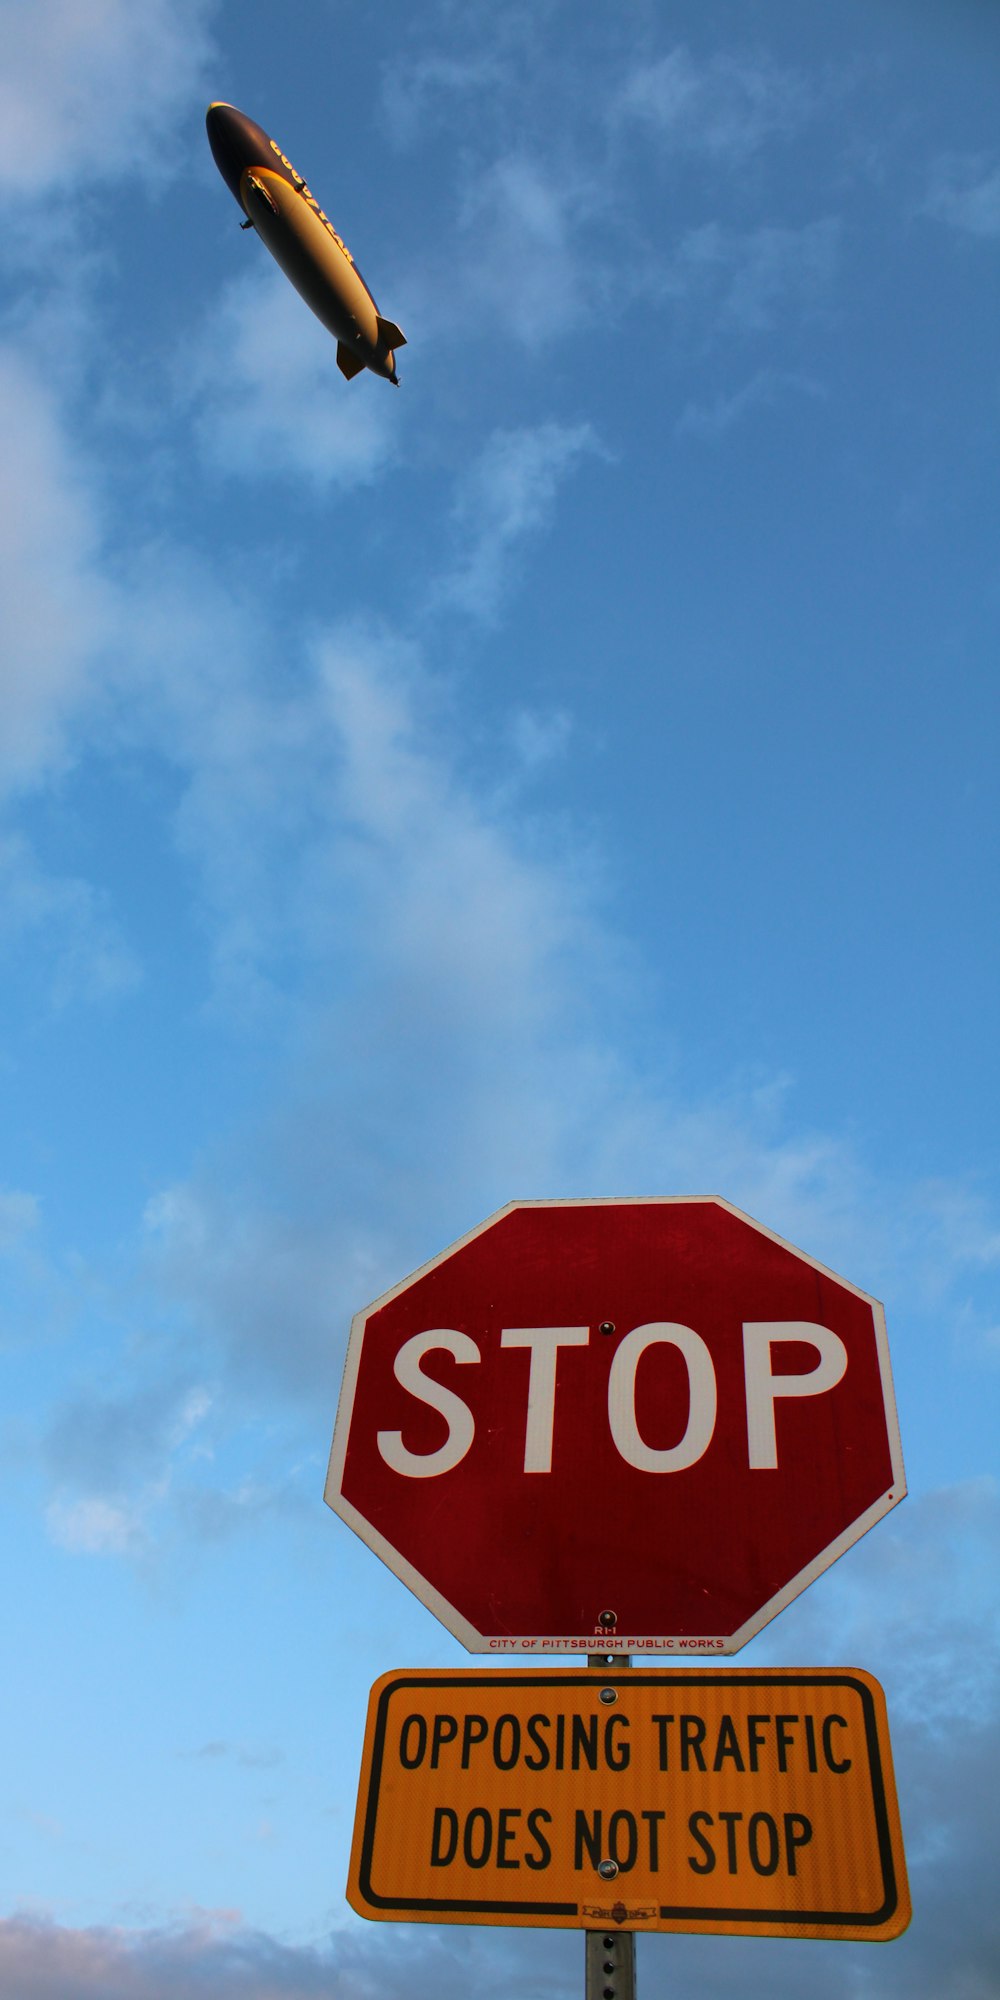 a red stop sign sitting under a blue cloudy sky